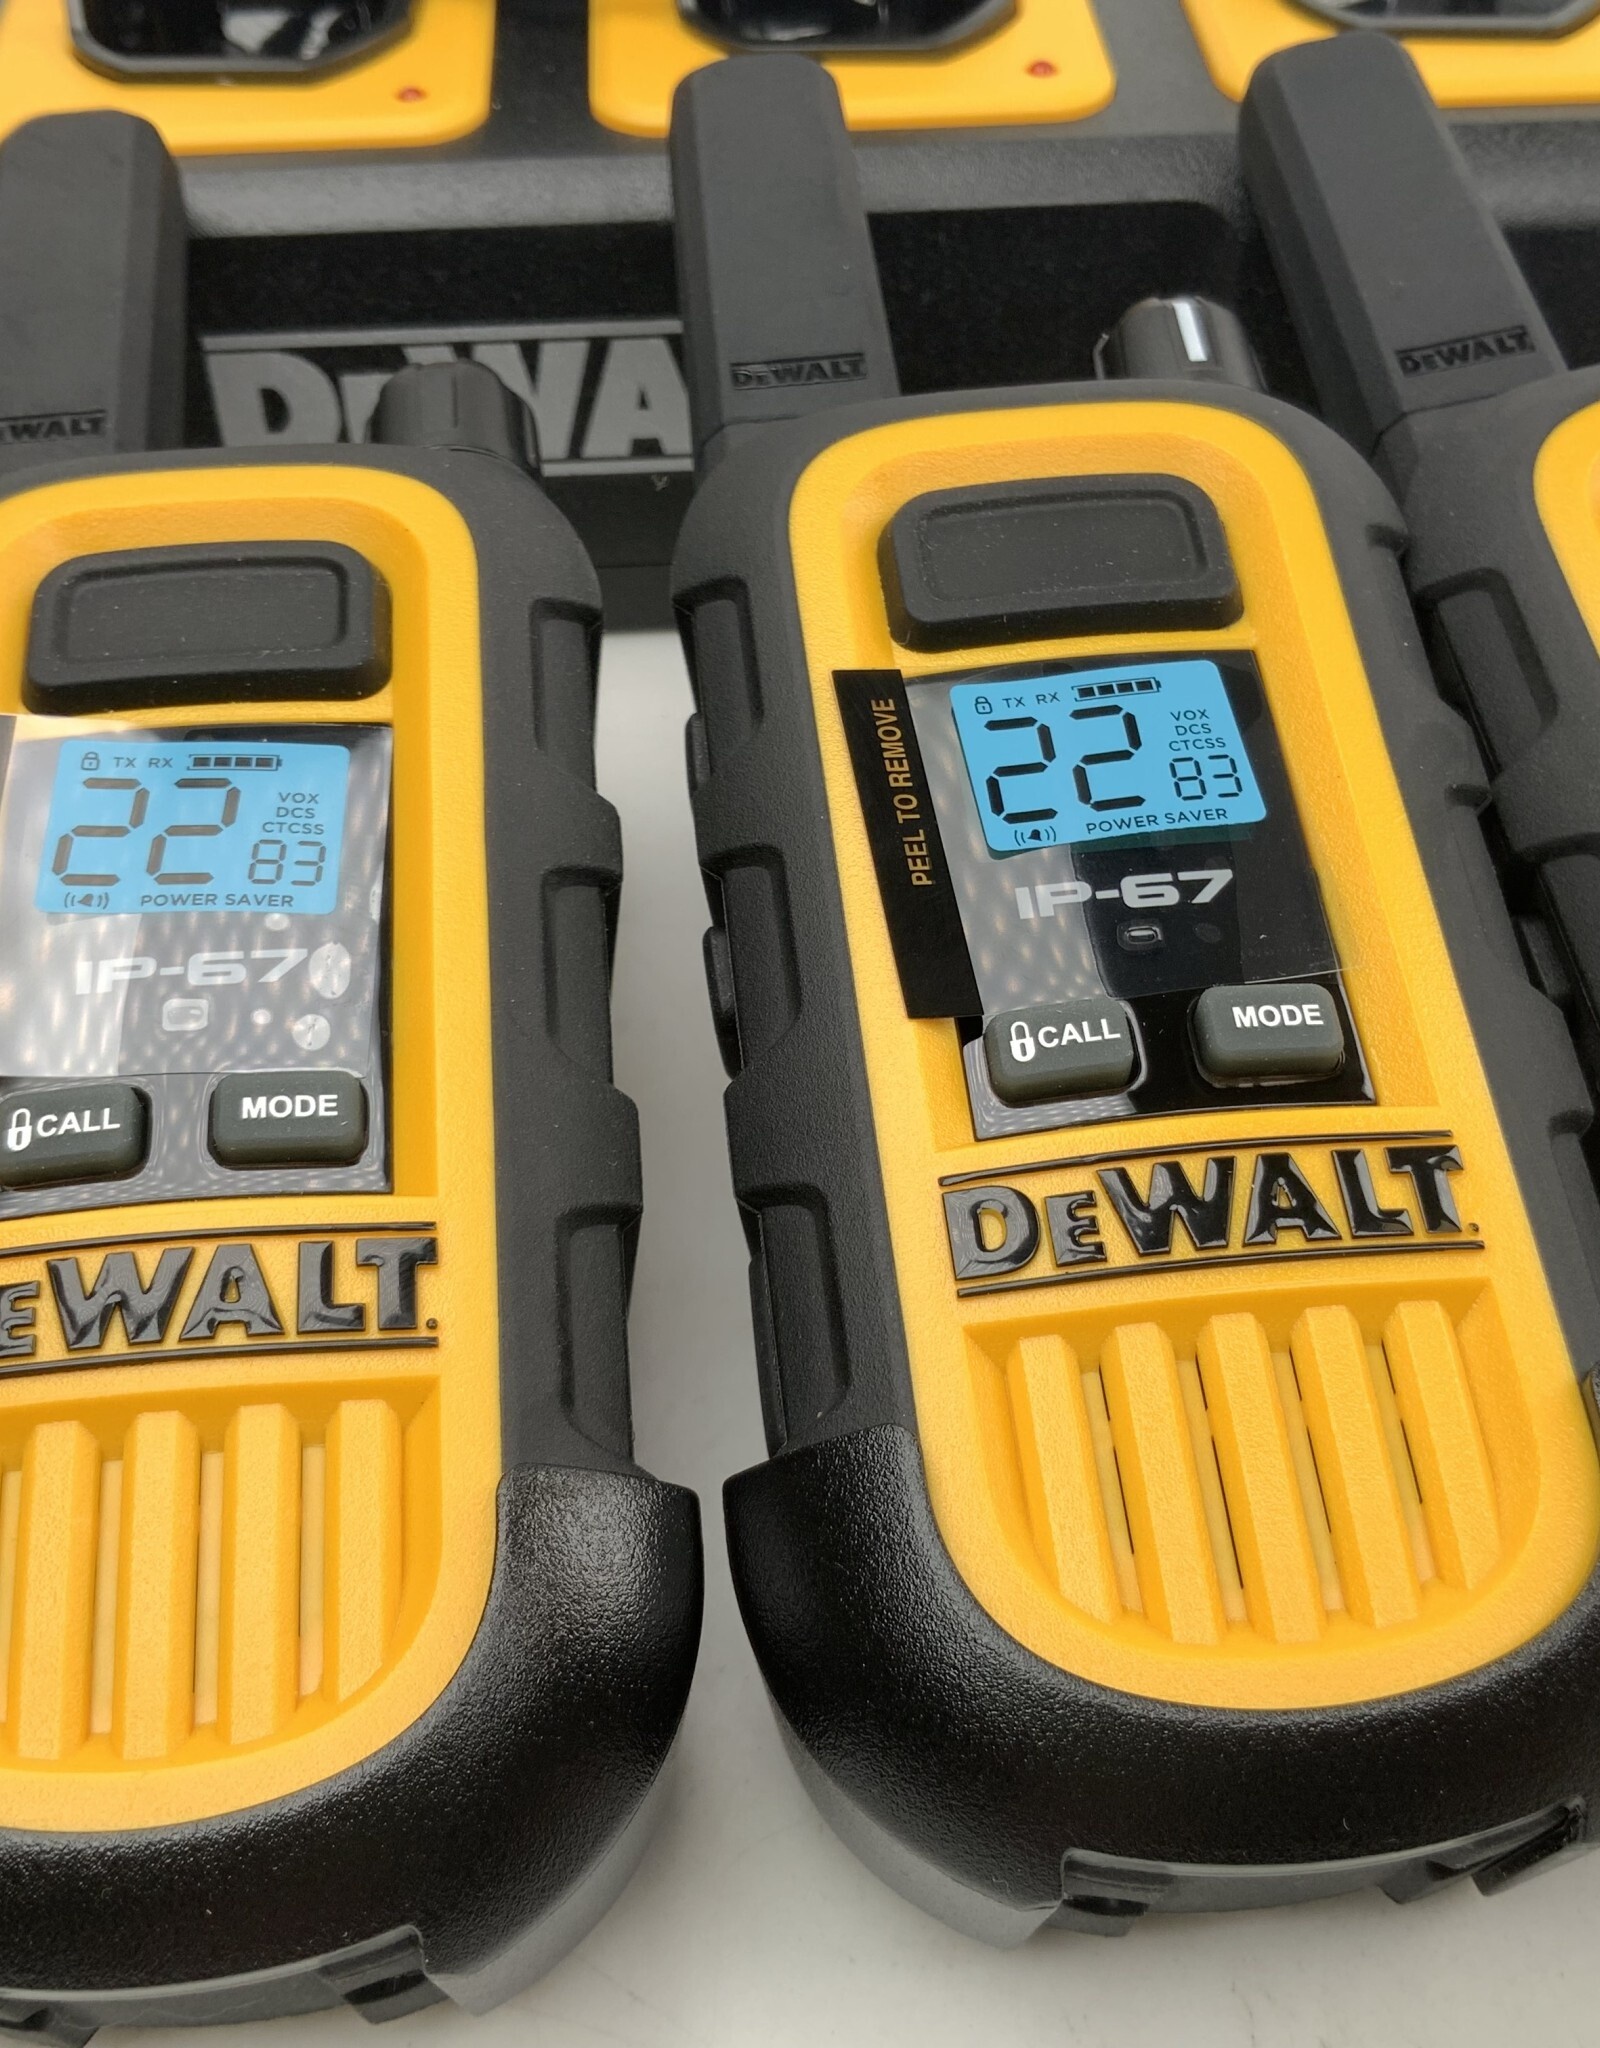 Dewalt Two Way Radios DXFRS300 6 Pack w/ Charger Used EX